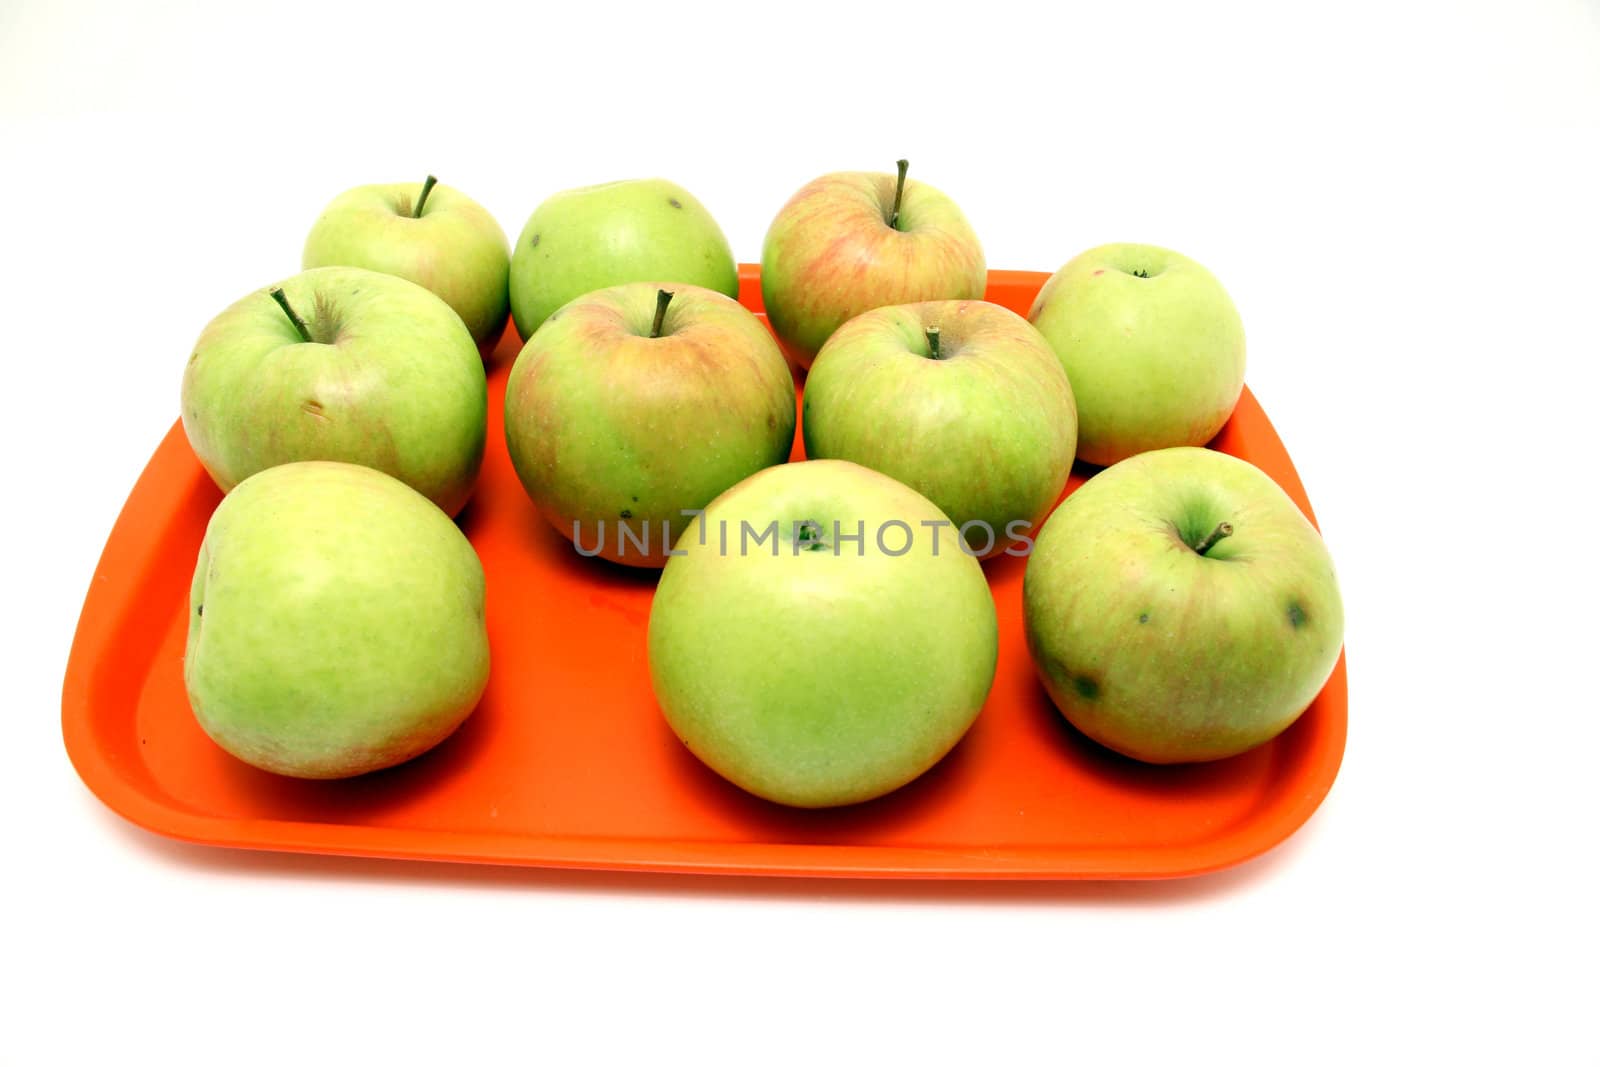 green apples over white background